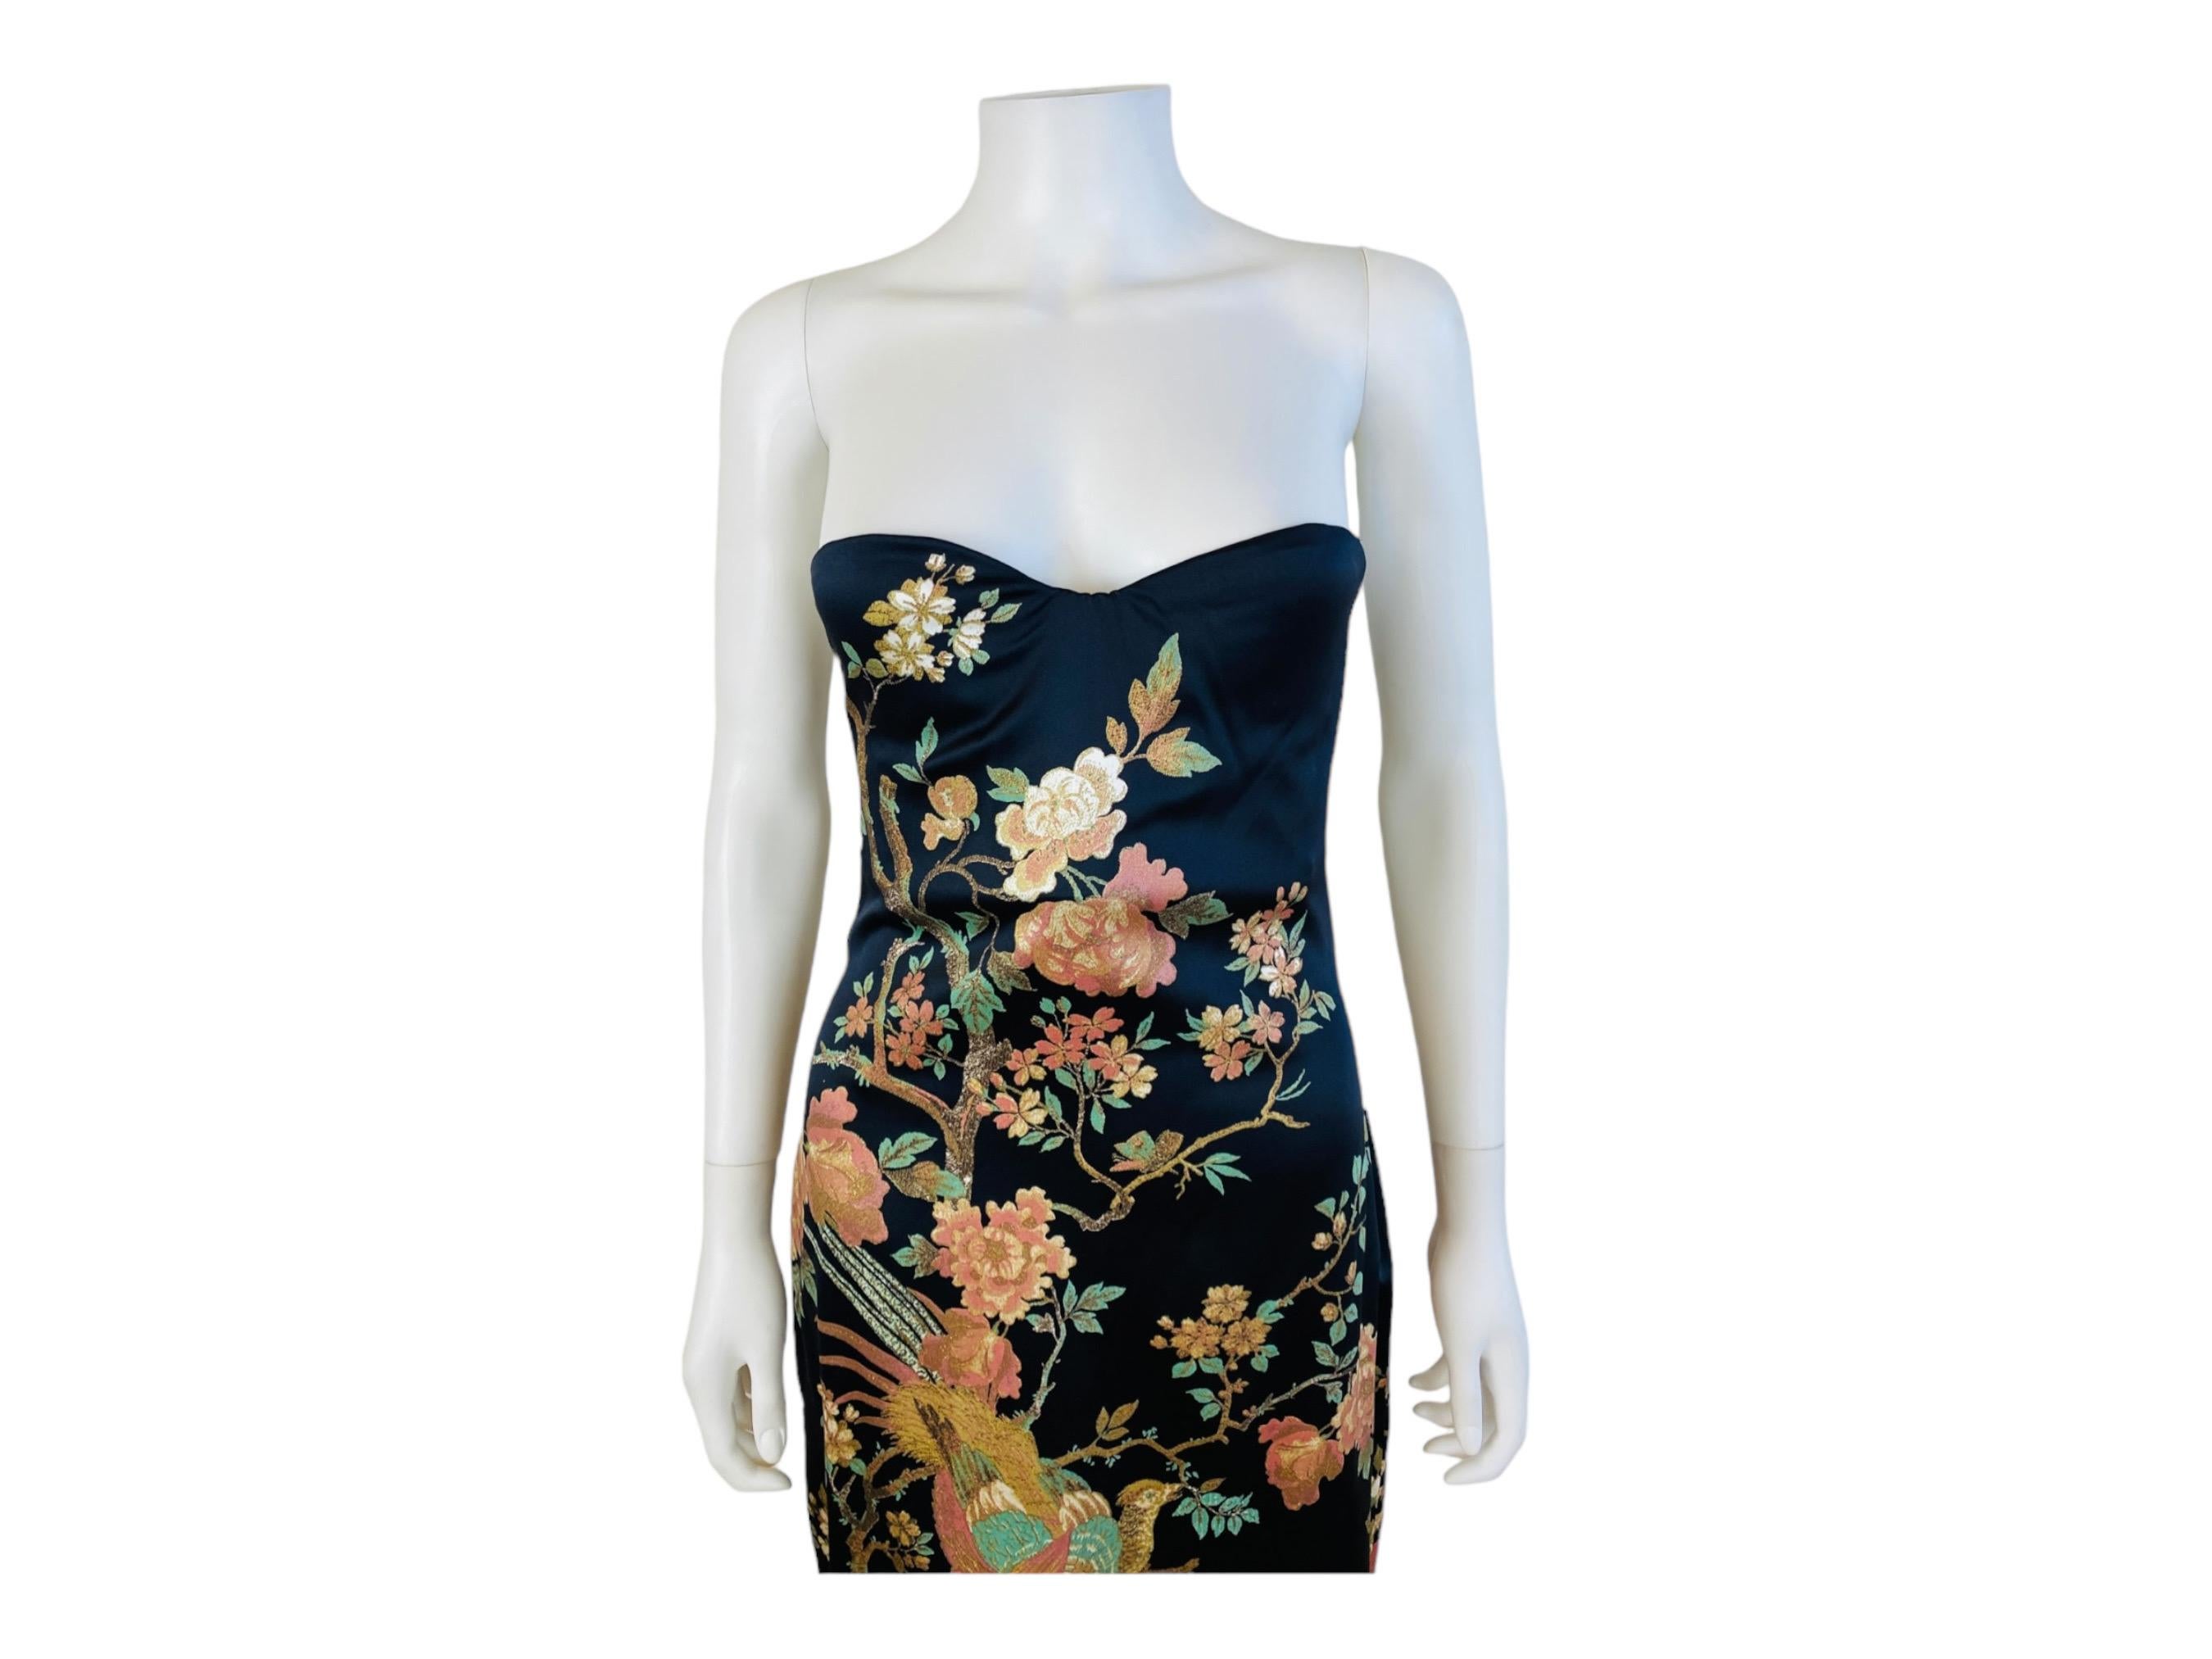 Vintage F/W 2006 Roberto Cavalli Black Silk Floral Pheasant Strapless Dress Gown In Excellent Condition For Sale In Denver, CO